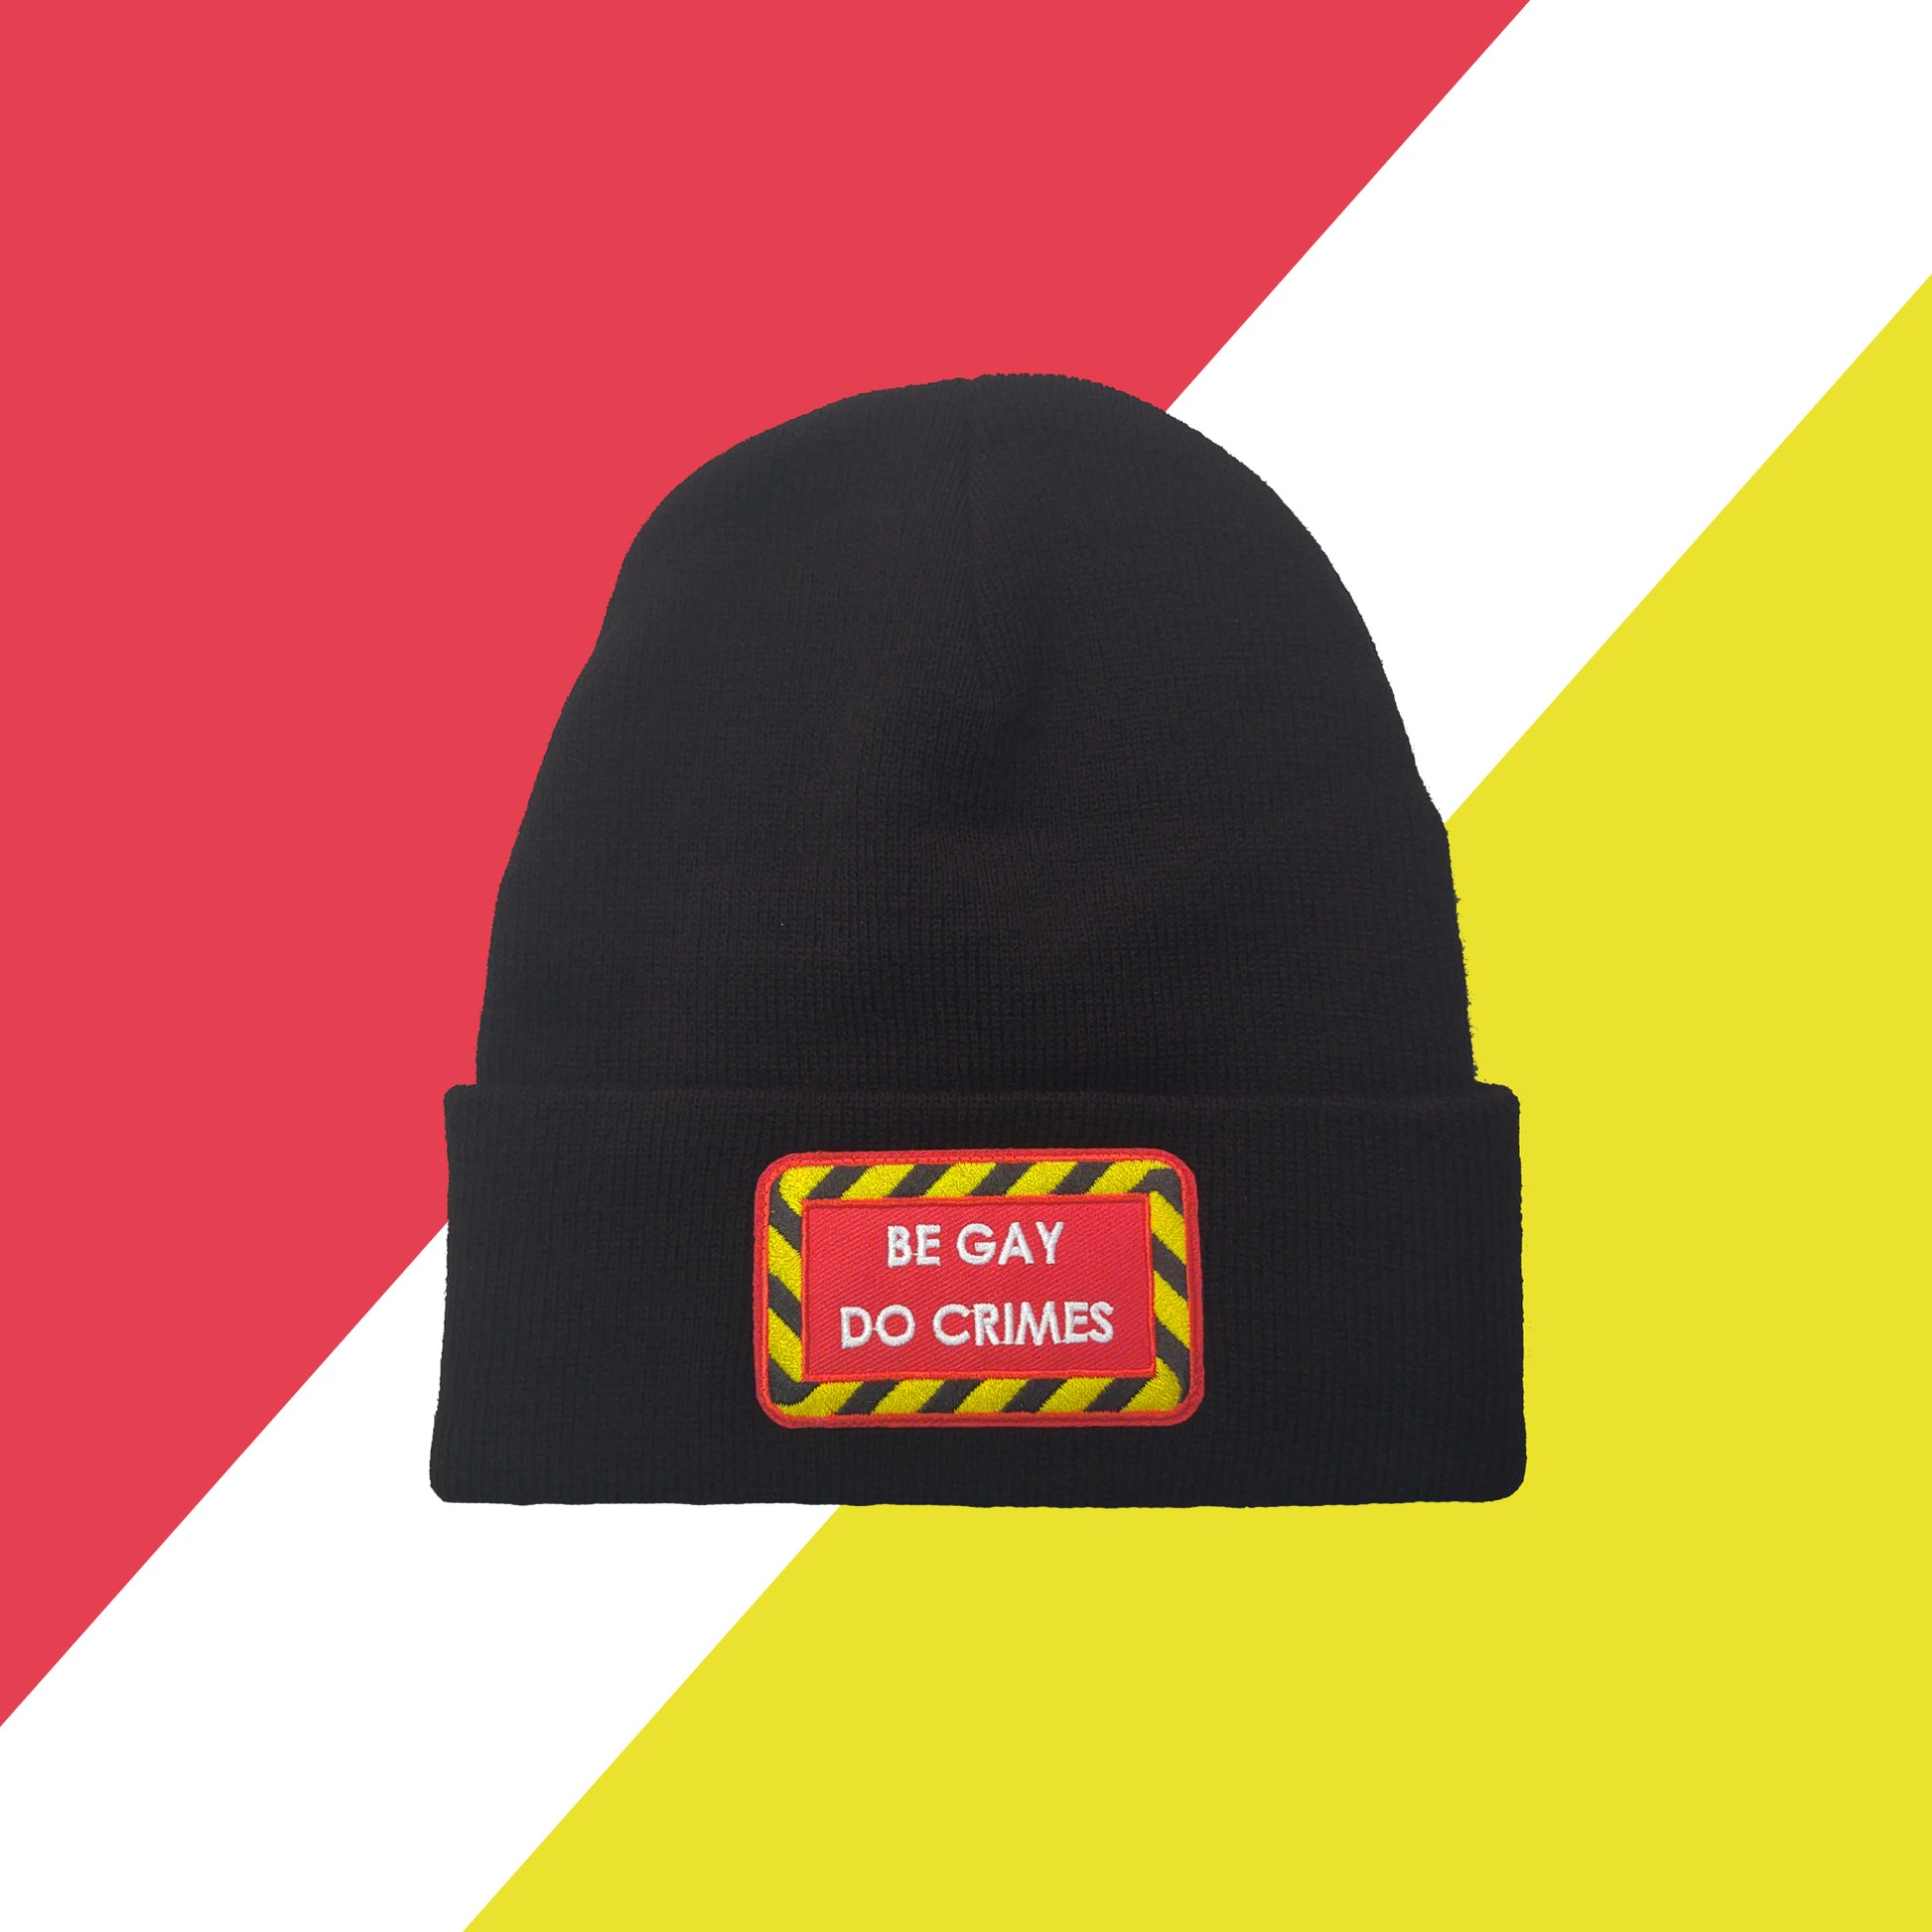 black beanie with red patch on the front with yellow and black striped border and white text reading "be gay do crimes". Background is red white and yellow shapes